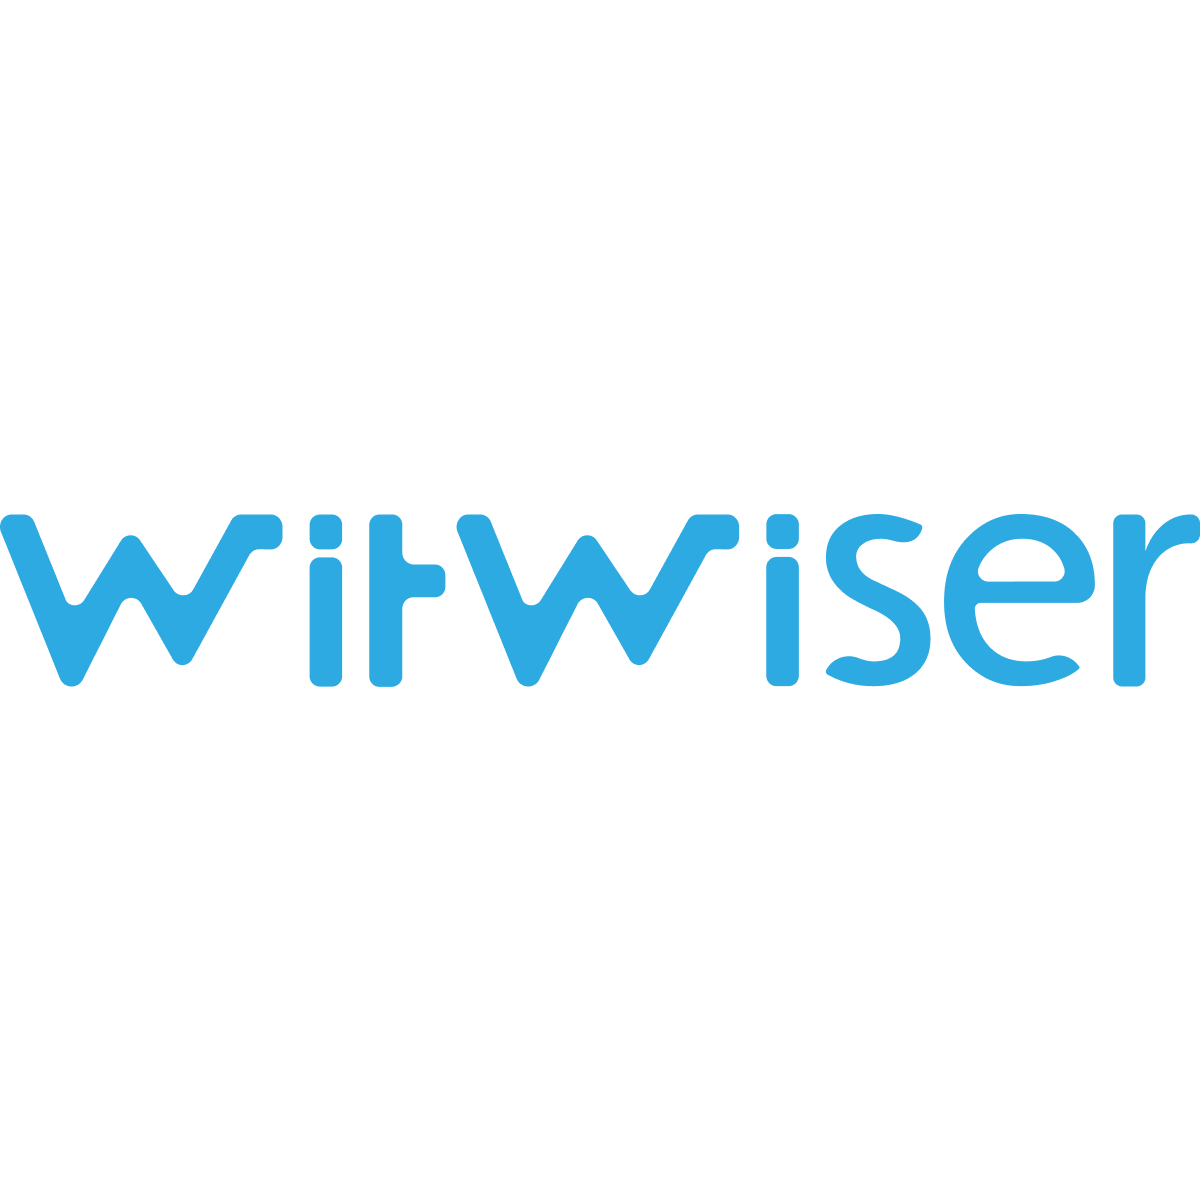 Witwiser